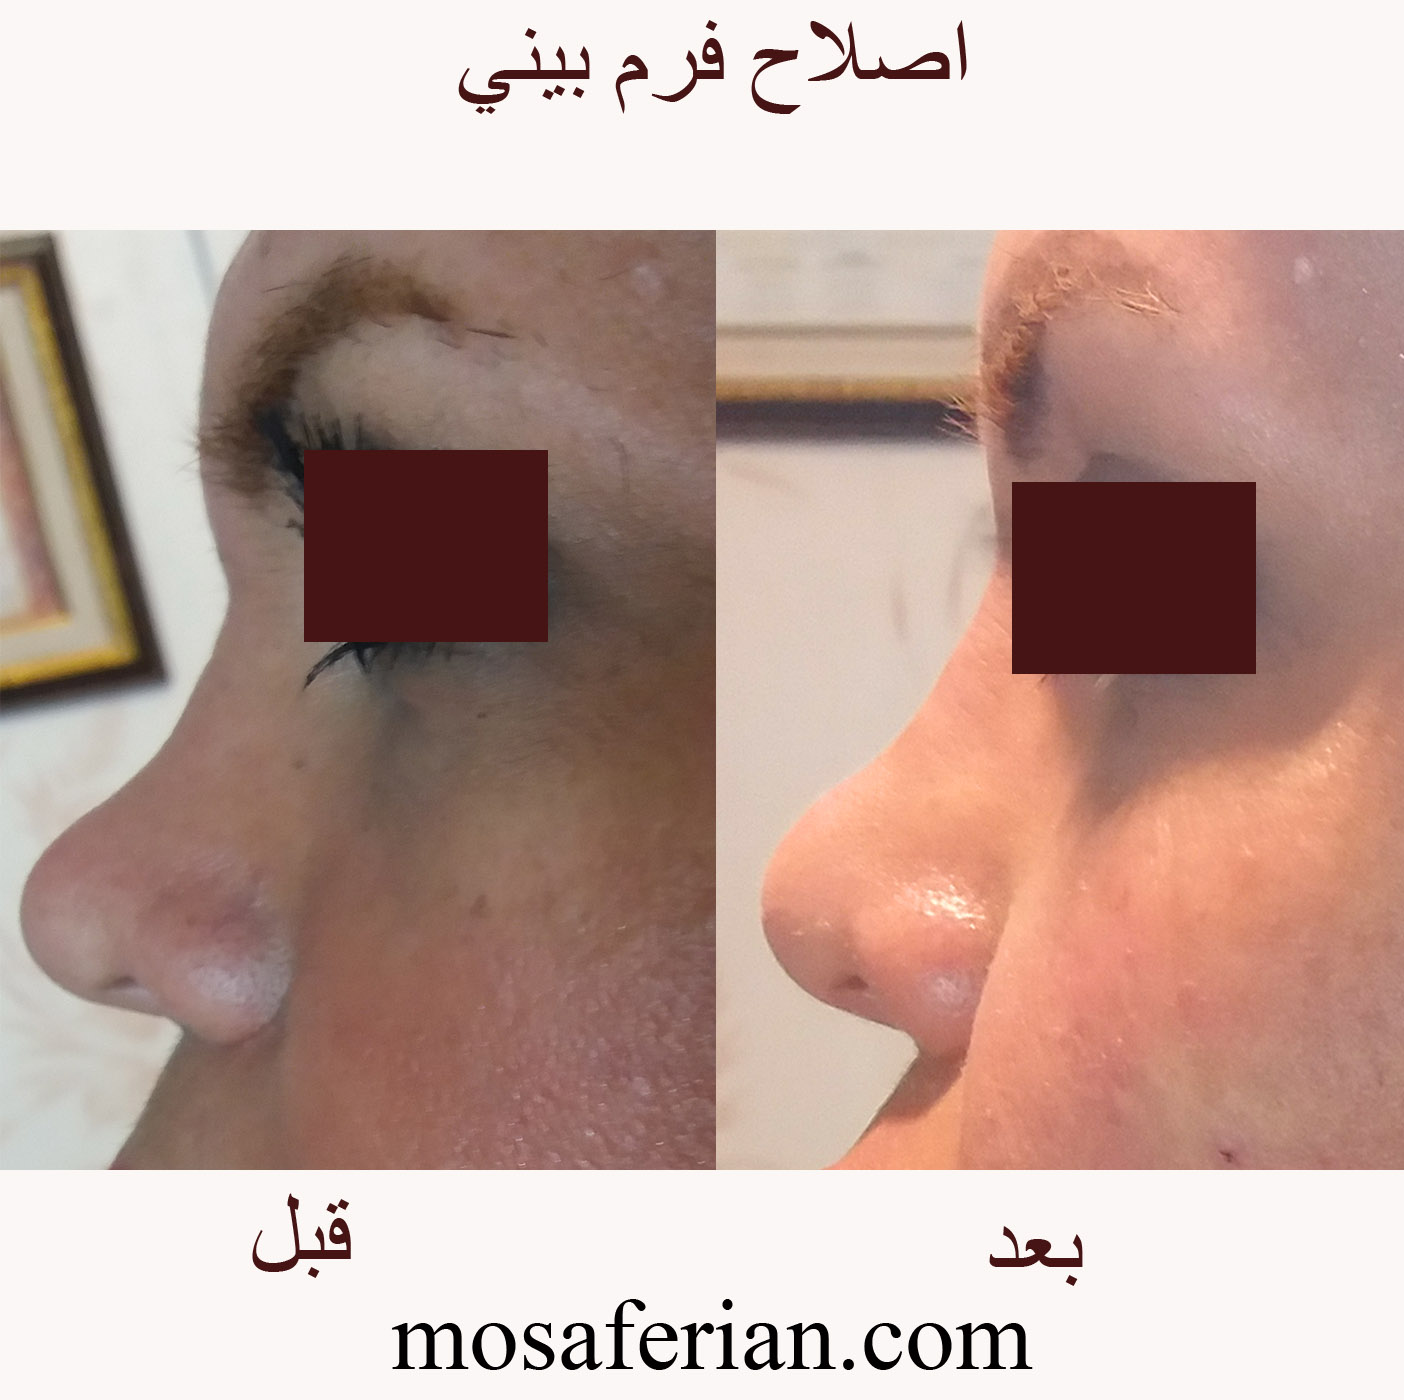 Non surgical nose job before and after